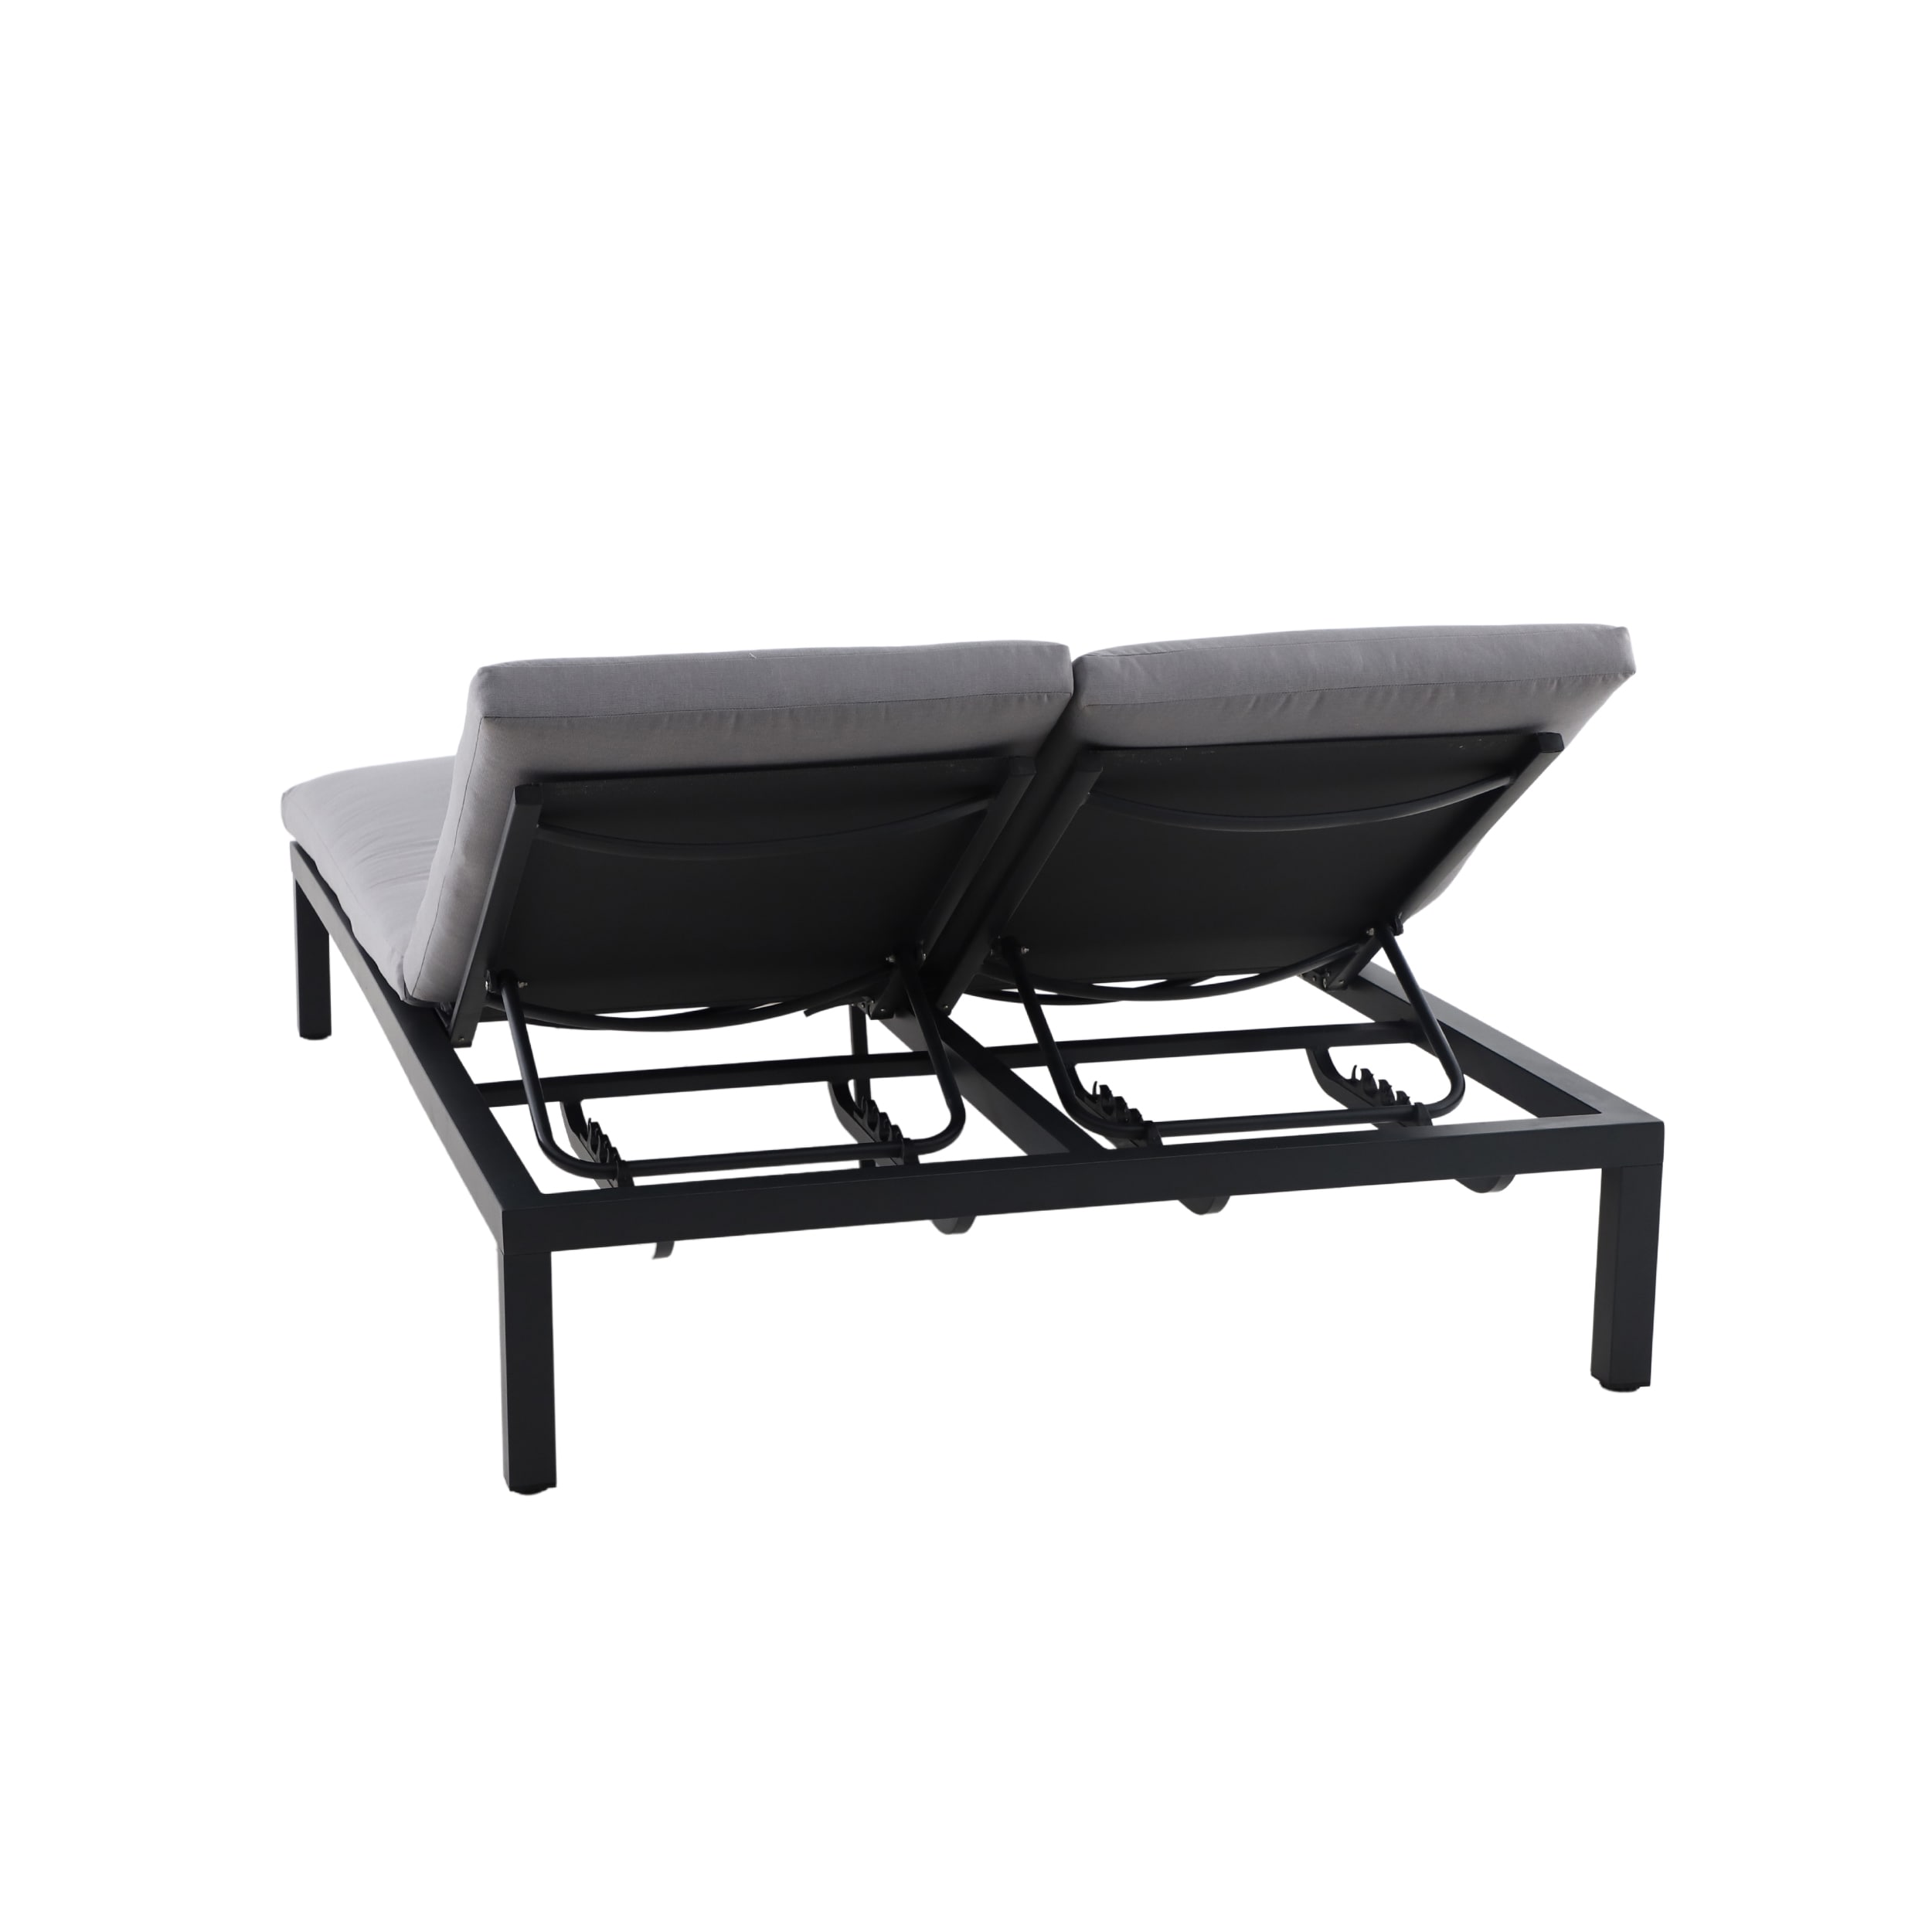 allen + roth Black Aluminum Frame Stationary Chaise Lounge Chair(s